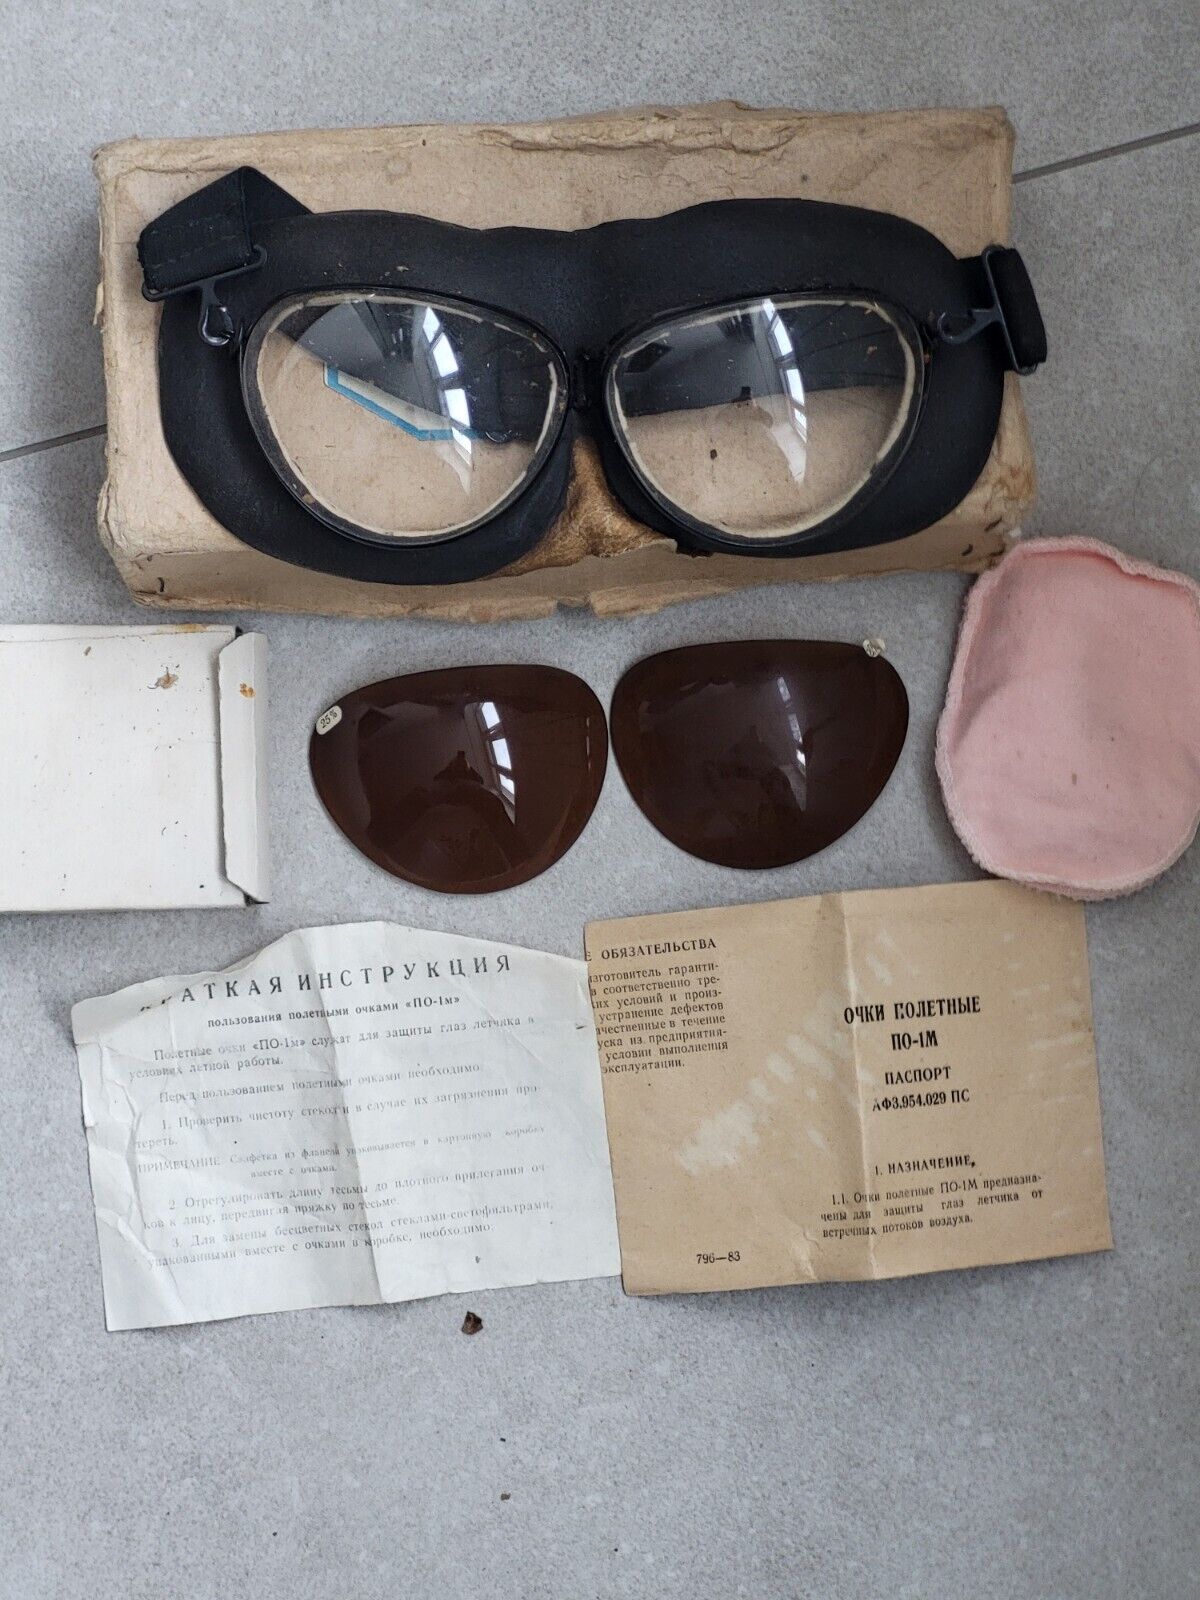 USSR MILITARY FLIGHT GOGGLES FOR A MiG PO FIGHTER PILOT OF THE USSR Air FORCE